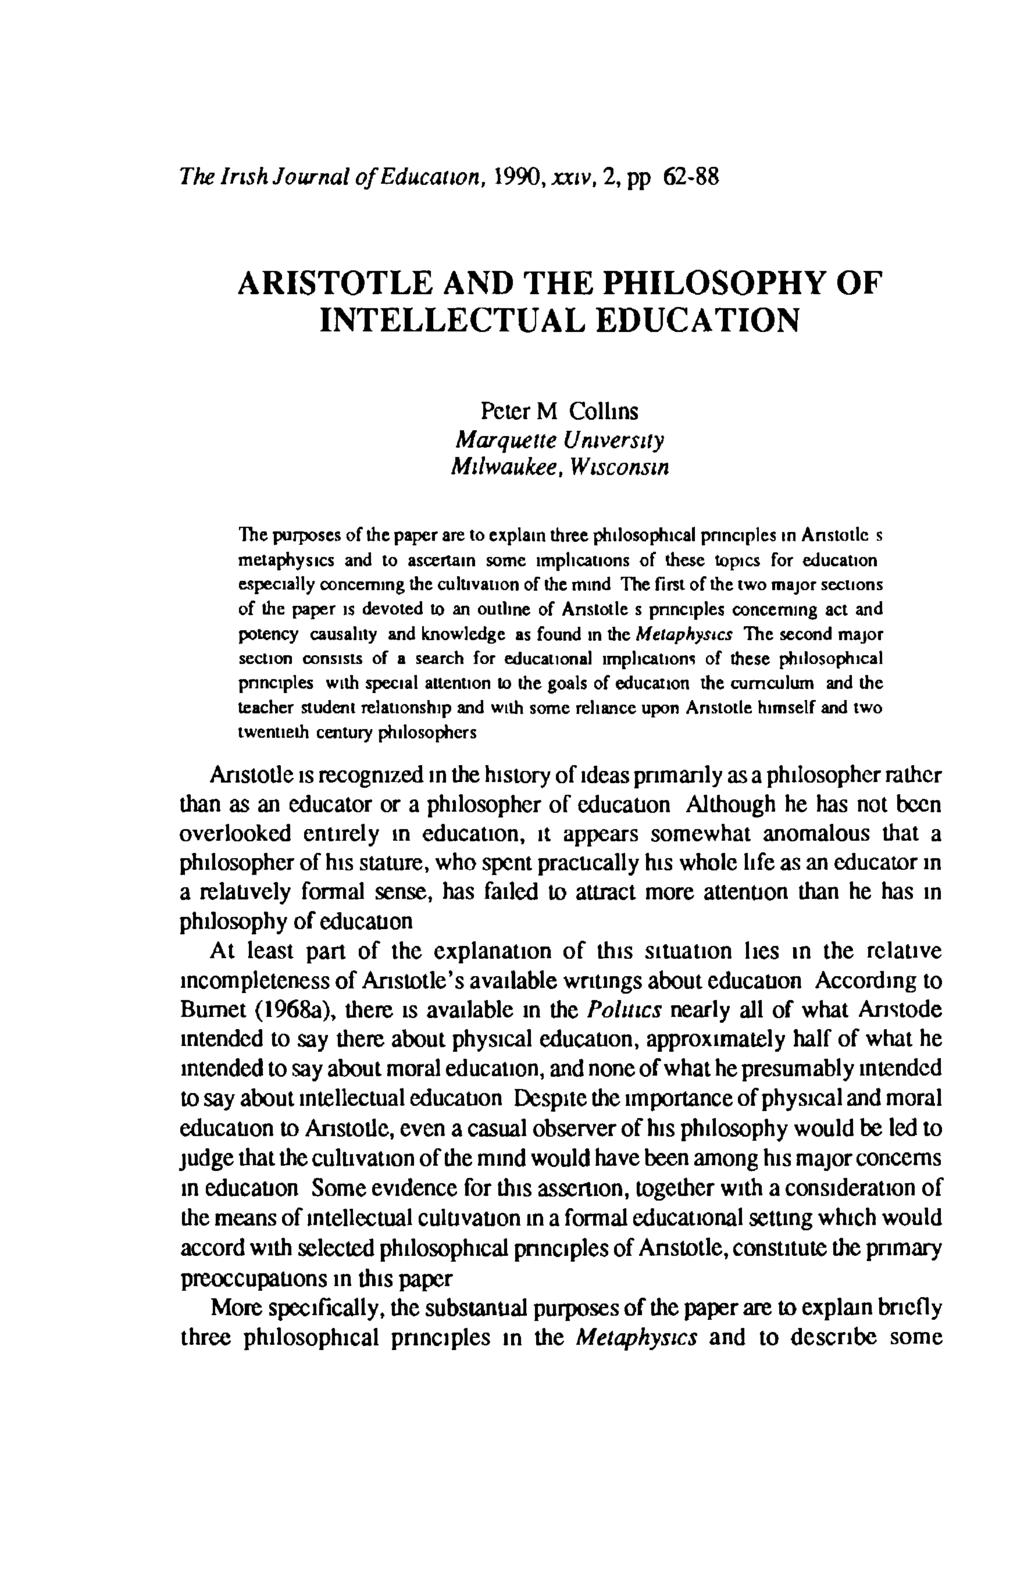 The Irish Journal o f Education, 1990, xxiv, 2, pp 62-88 ARISTOTLE AND THE PHILOSOPHY OF INTELLECTUAL EDUCATION Peter M Collins Marquette University Milwaukee, Wisconsin The purposes of the paper are